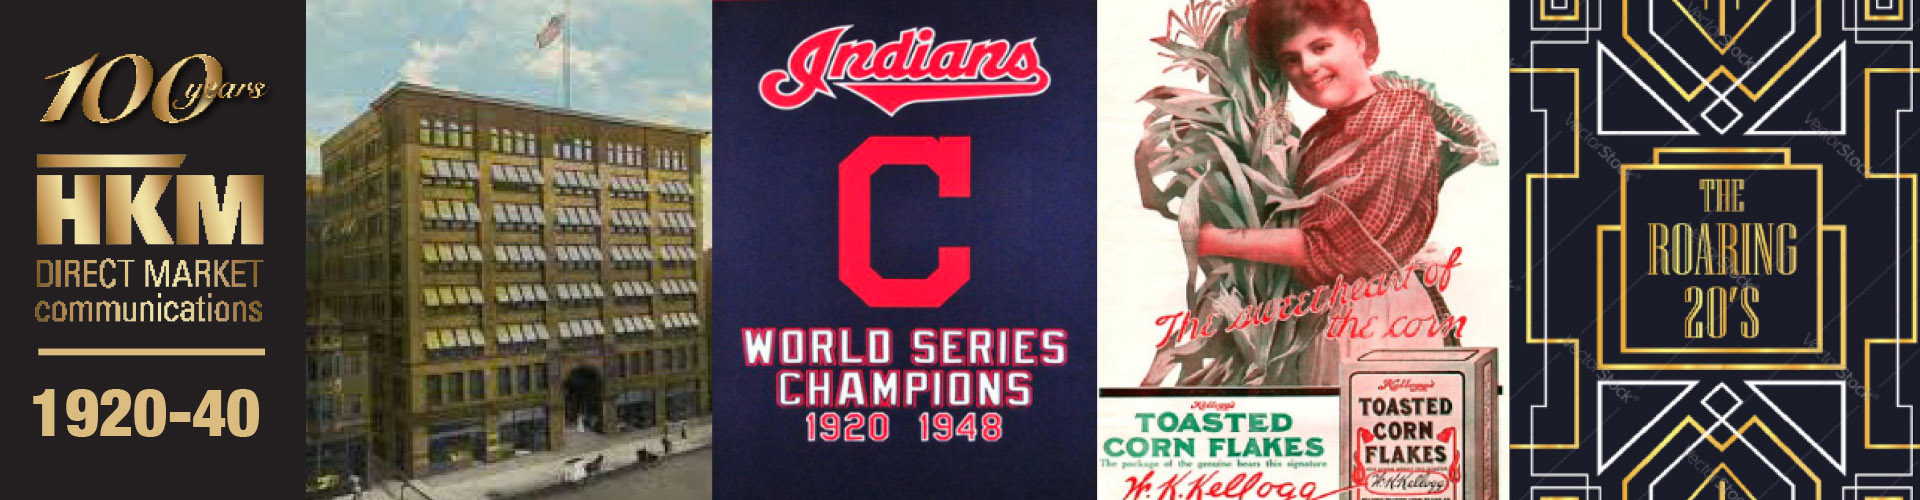 Cleveland Indians: 1920 World Series Champions, 100 years later